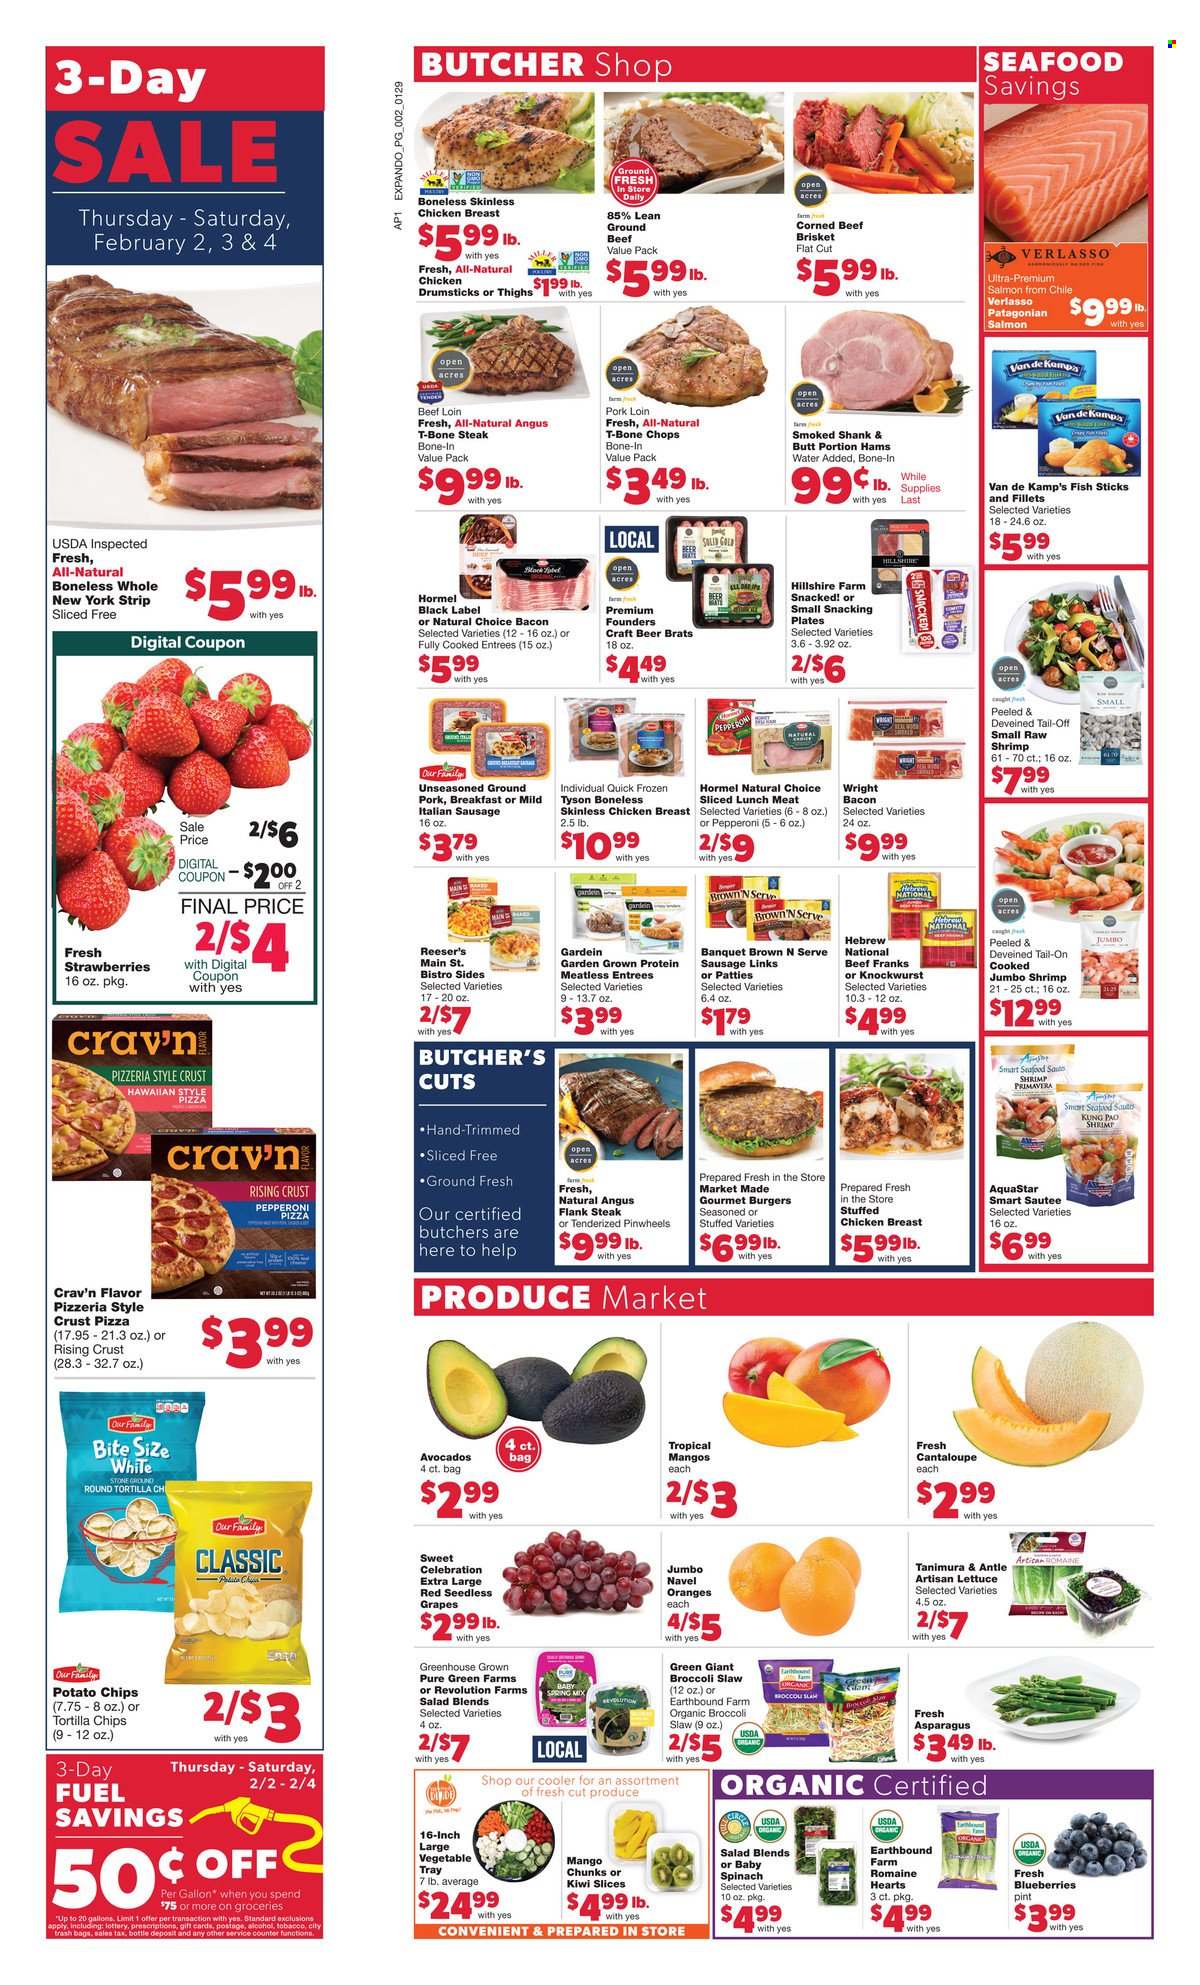 thumbnail - Family Fare Flyer - 01/29/2023 - 02/04/2023 - Sales products - asparagus, broccoli, cantaloupe, salad, avocado, blueberries, grapes, kiwi, seedless grapes, strawberries, oranges, salmon, seafood, fish, shrimps, fish fingers, Van de Kamp's, fish sticks, pizza, hamburger, Hormel, stuffed chicken, bacon, Hillshire Farm, sausage, pepperoni, italian sausage, lunch meat, corned beef, Celebration, tortilla chips, potato chips, beer, chicken drumsticks, beef meat, ground beef, t-bone steak, steak, beef brisket, flank steak, ground pork, pork loin, pork meat, bag, trash bags, tray, navel oranges. Page 2.